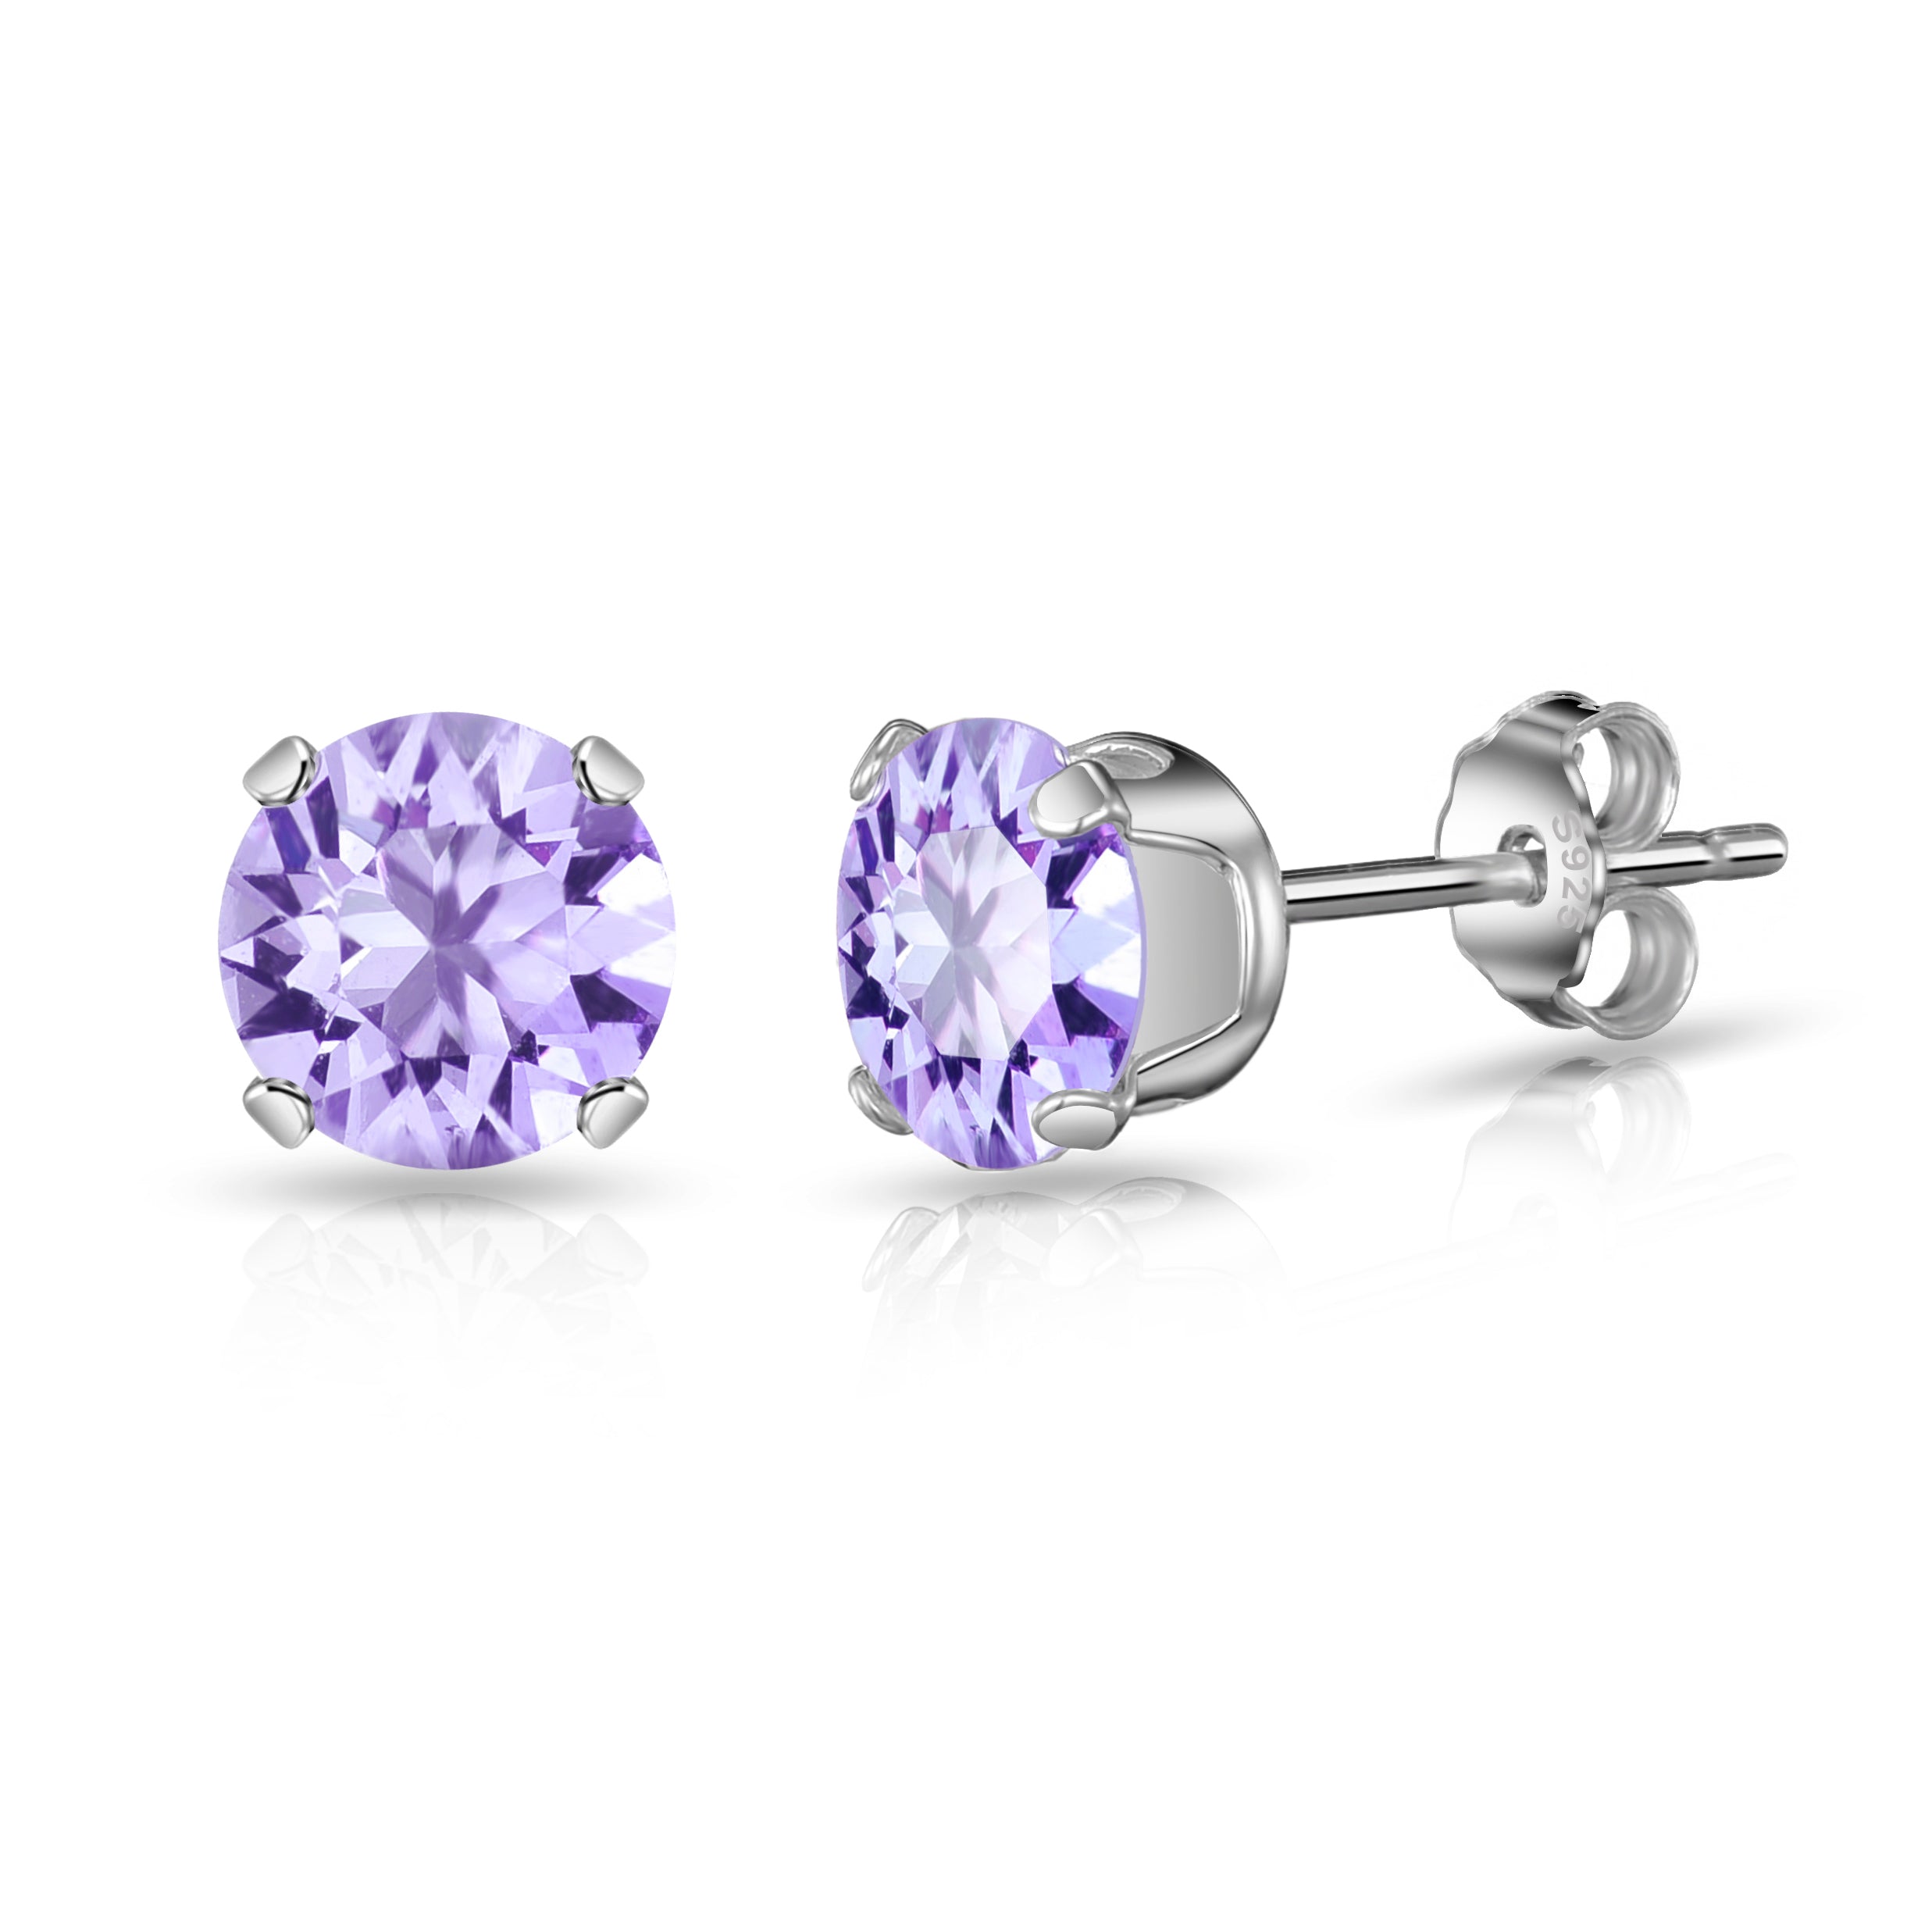 Sterling Silver Provence Lavender Earrings Created with Zircondia® Crystals by Philip Jones Jewellery